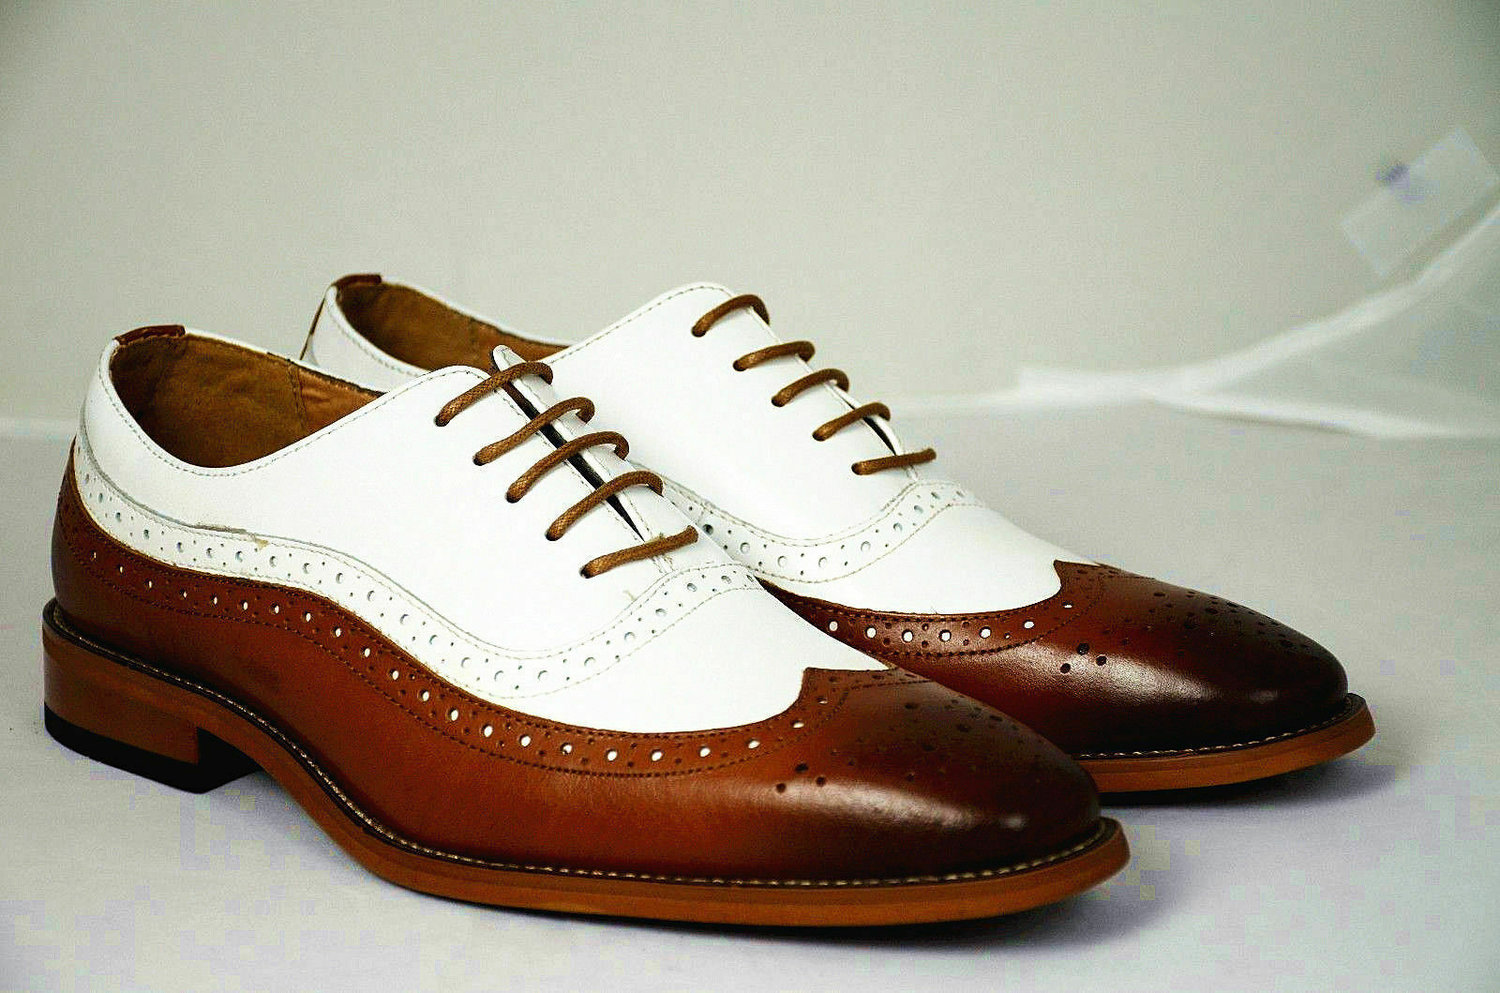 Men's Handmade Shoes Two Tone Dark Tan & White Brogue Oxford Formal Lace Up  Boots FWS-618 — Curvento